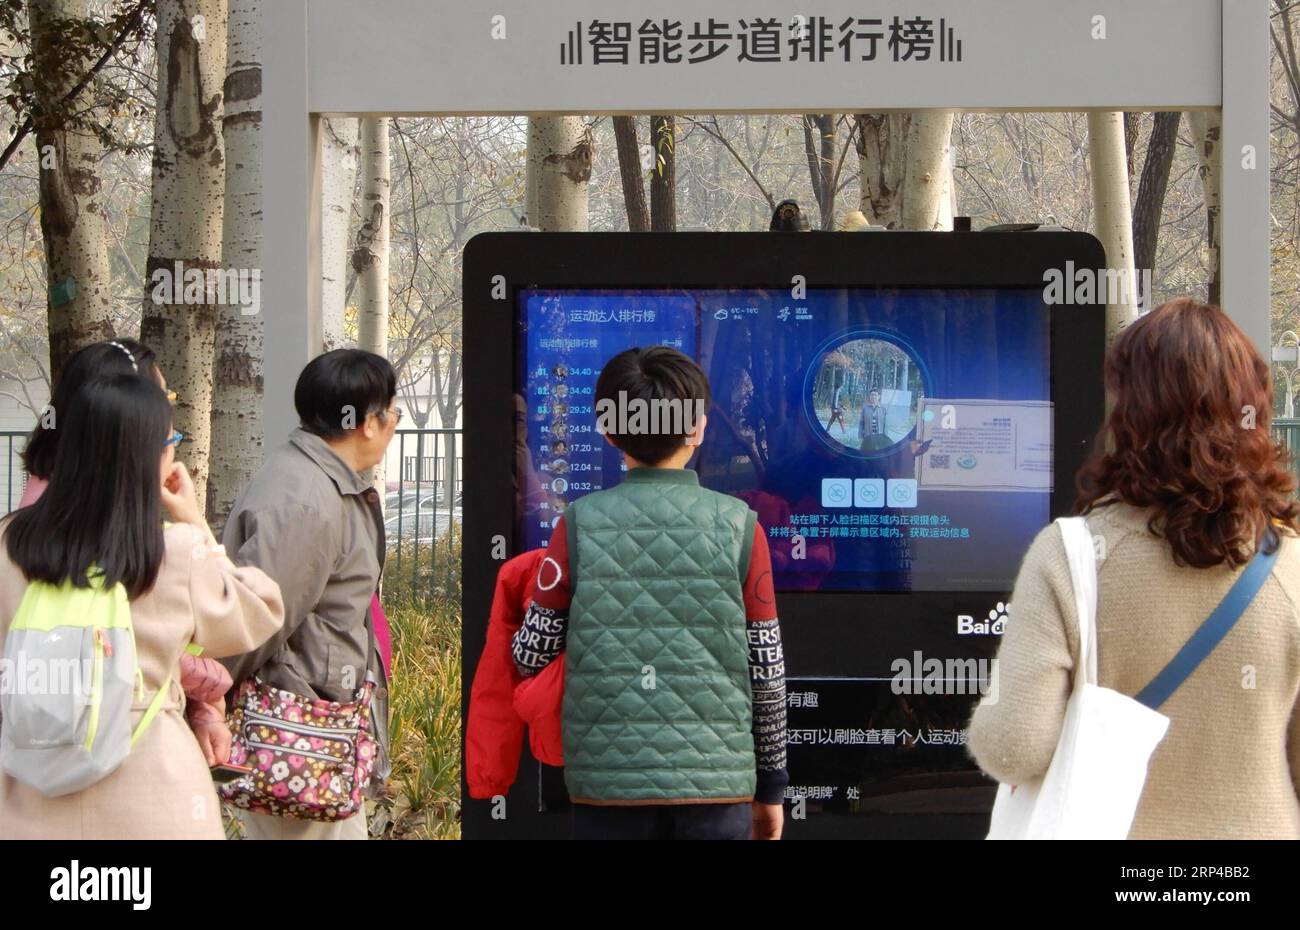 (181103) -- BEIJING, Nov. 3, 2018 -- Citizens view statistics on the screen of an intelligent running track at an AI park in Haidian District in Beijing, capital of China, on Nov. 3, 2018. An AI park co-built by Haidian authorities and Baidu, China s search engine giant, was opened to the public recently. The park is equipped with various AI facilities, such as intelligent running track, unmanned sightseeing bus and face recognition automat, offering AI experience for citizens. ) (sxk) CHINA-BEIJING-AI PARK (CN) LixXin PUBLICATIONxNOTxINxCHN Stock Photo